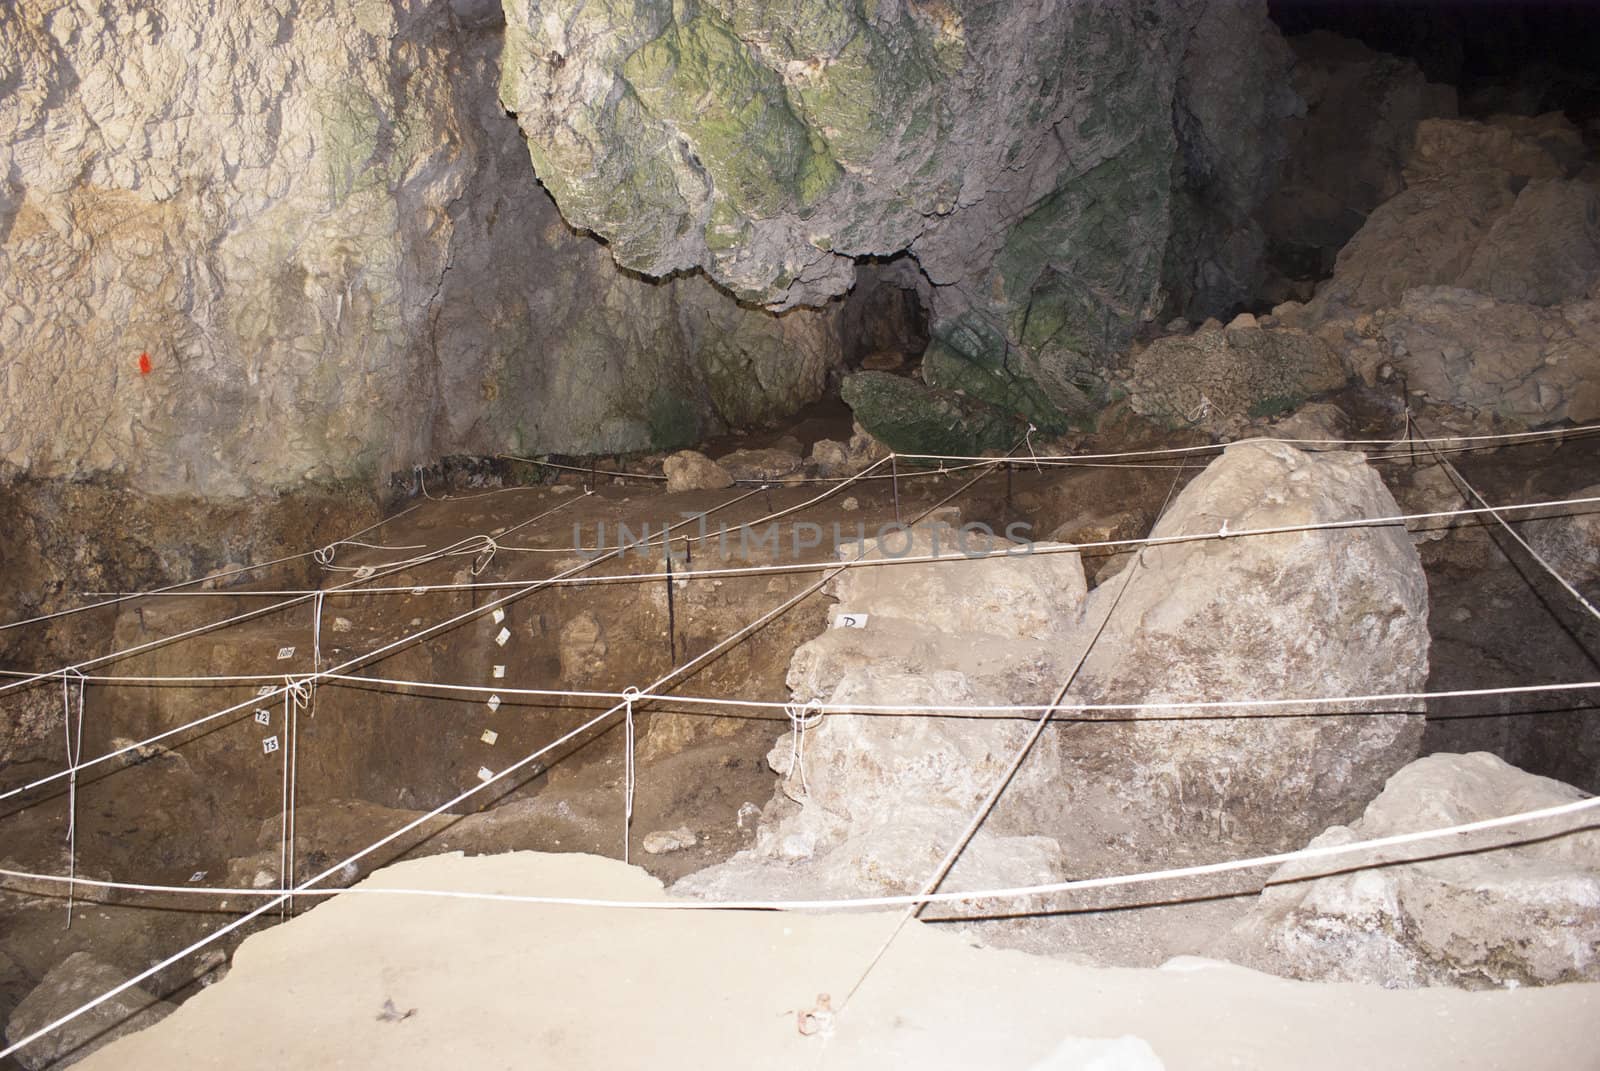 San Teodoro Cave, Acquedolci, Sicily. Here were found the fossil remains of the first woman in Sicily, which was given the name of Thea (from the Latin Theodora) to connect to the cave